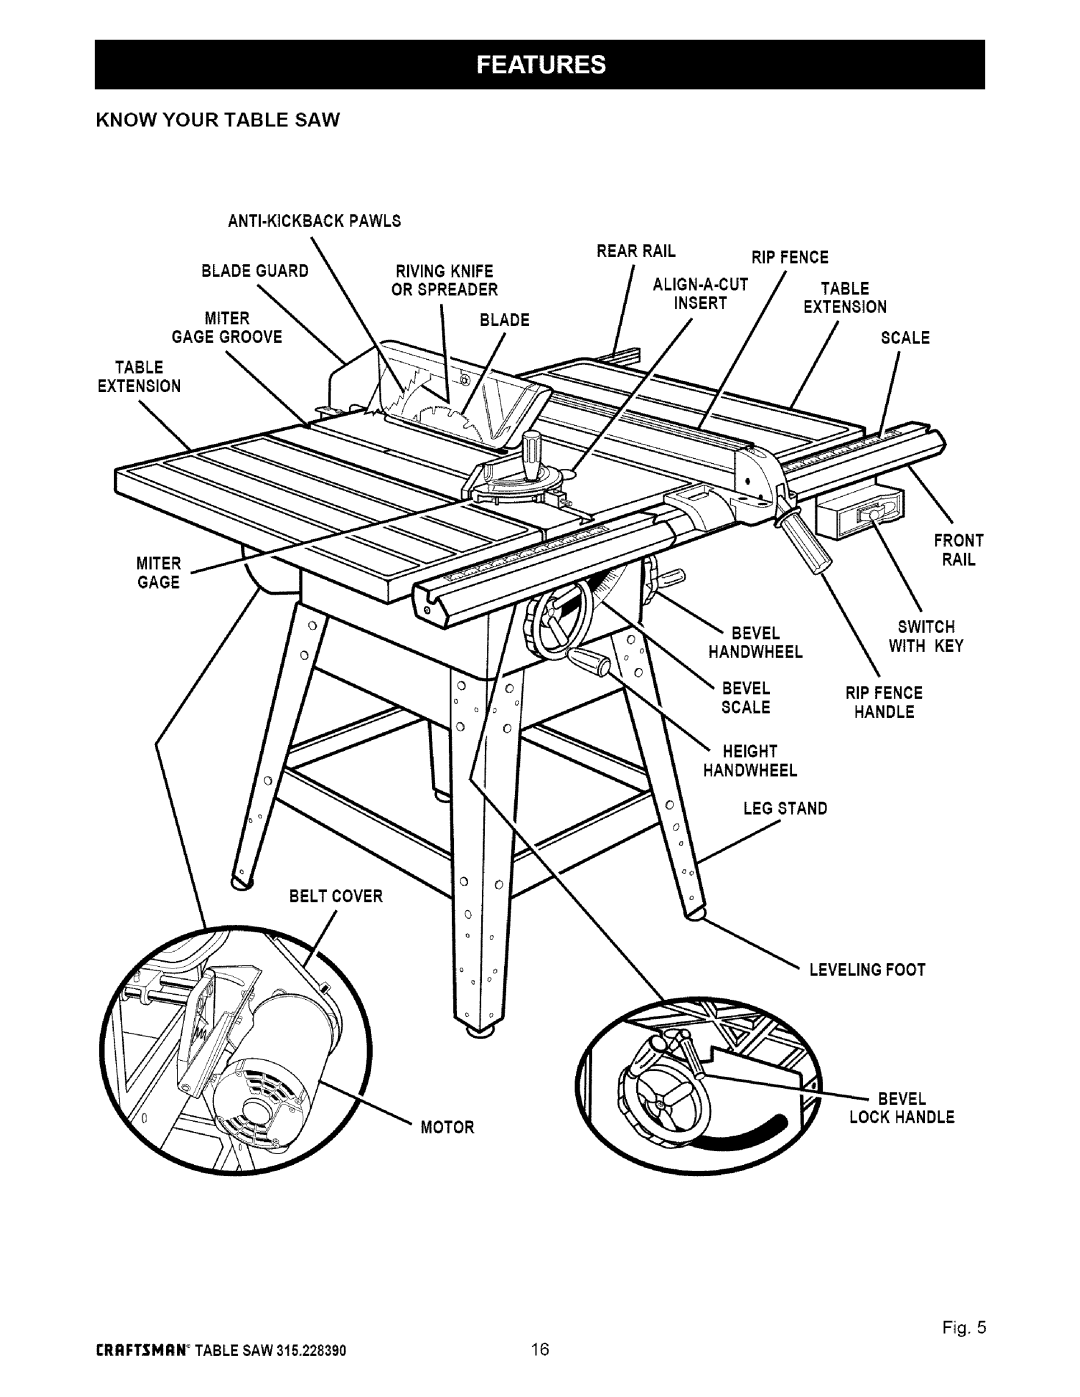 Craftsman 315.22839 Know Your Table Saw, Anti-Kickback Pawls, Rearrail, Rip Fence, Bladeguard, Rivingknife, Align-A-Cut 